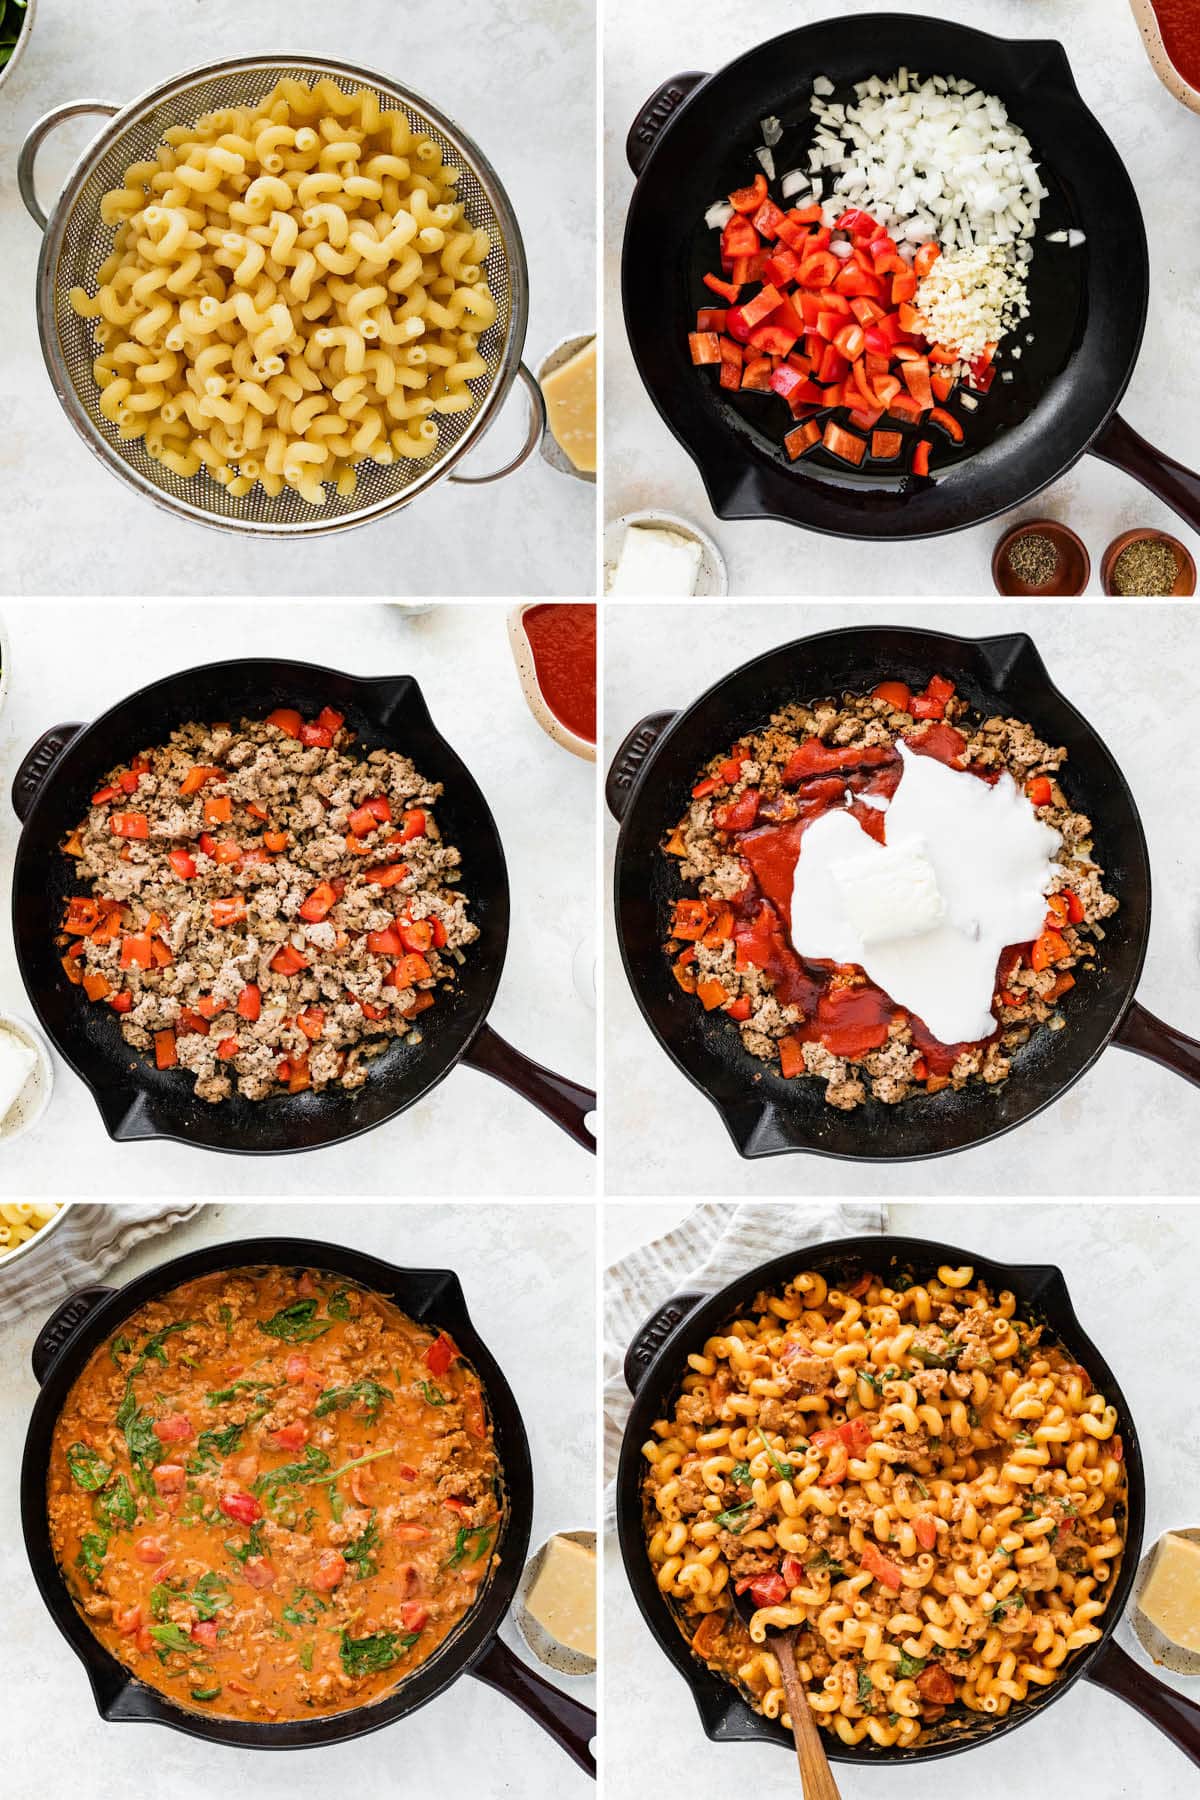 Six photos showing the steps to make Ground Turkey Pasta: cooking pasta, sautéing onion, garlic, peppers and ground turkey. Adding tomato sauce, cream cheese and coconut milk, simmering with spinach and then tossing with pasta.